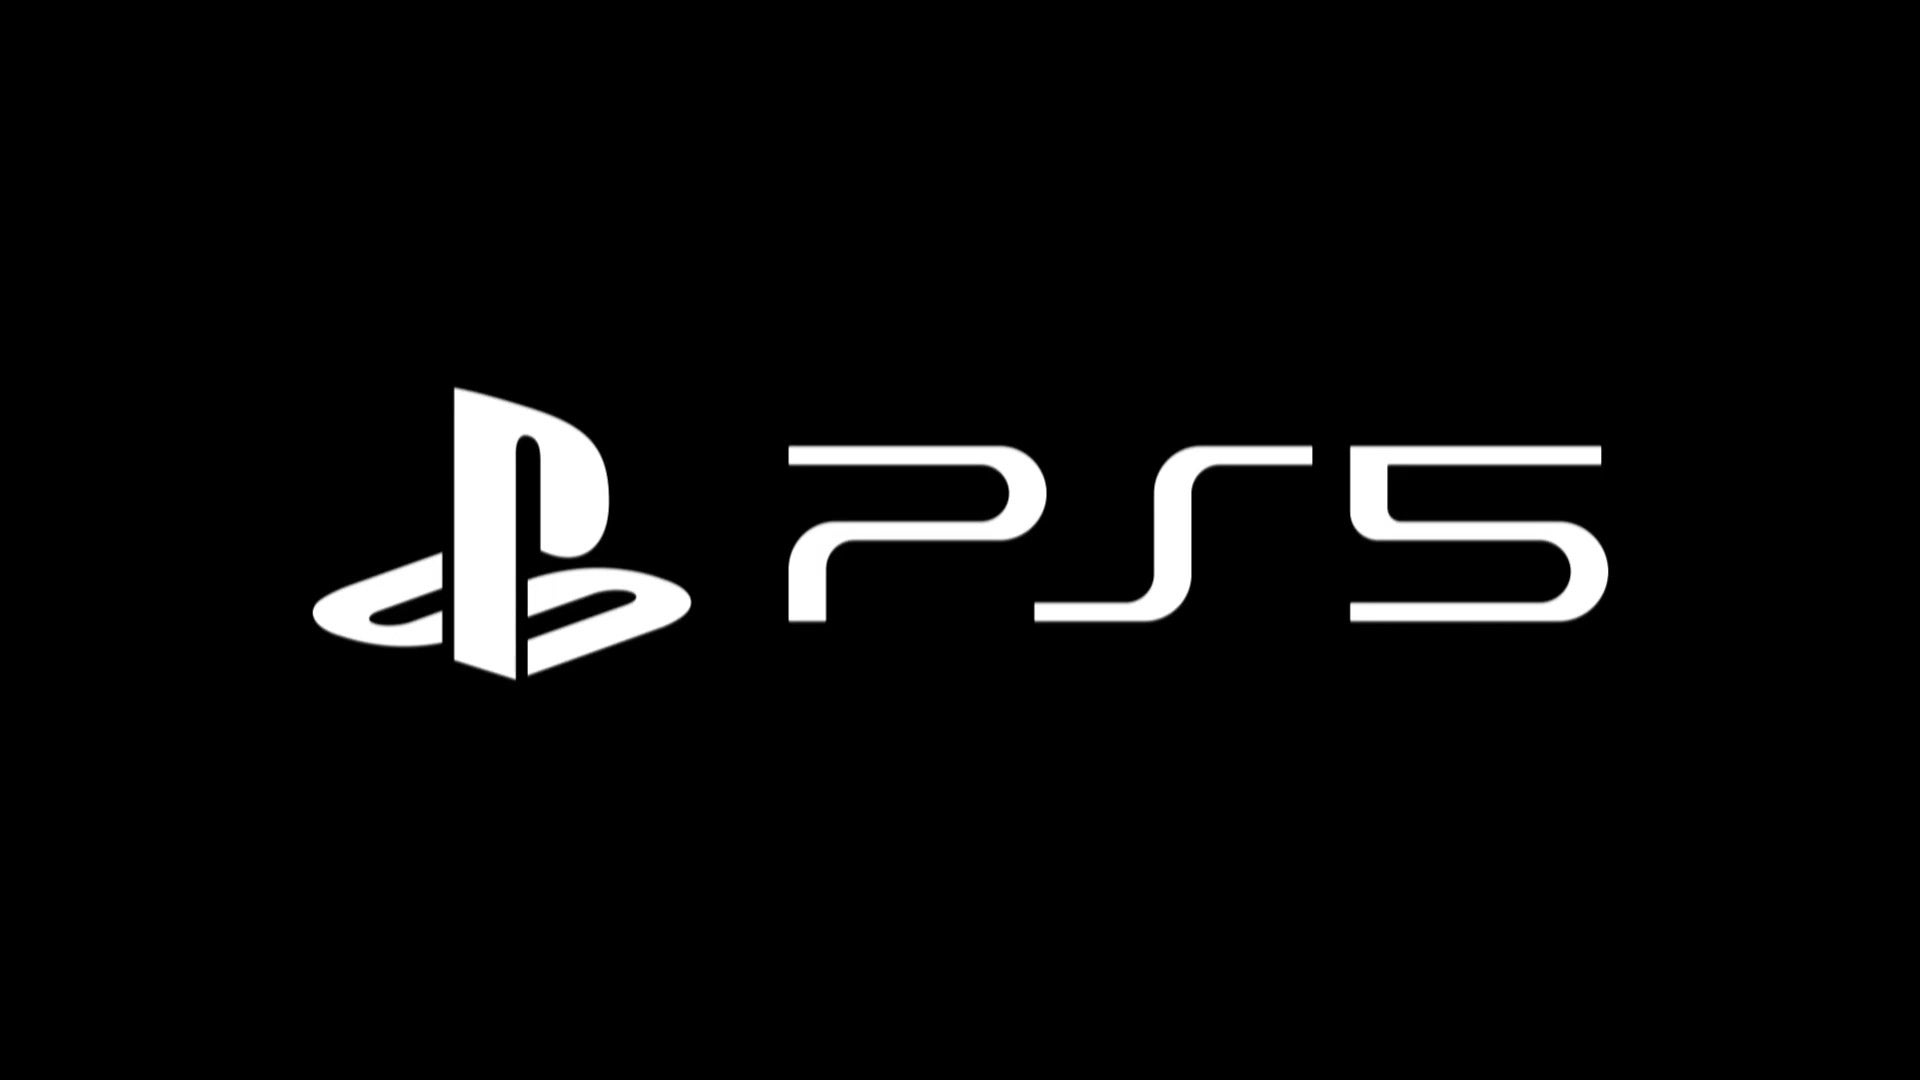 Image for Watch today's big PS5 reveal here